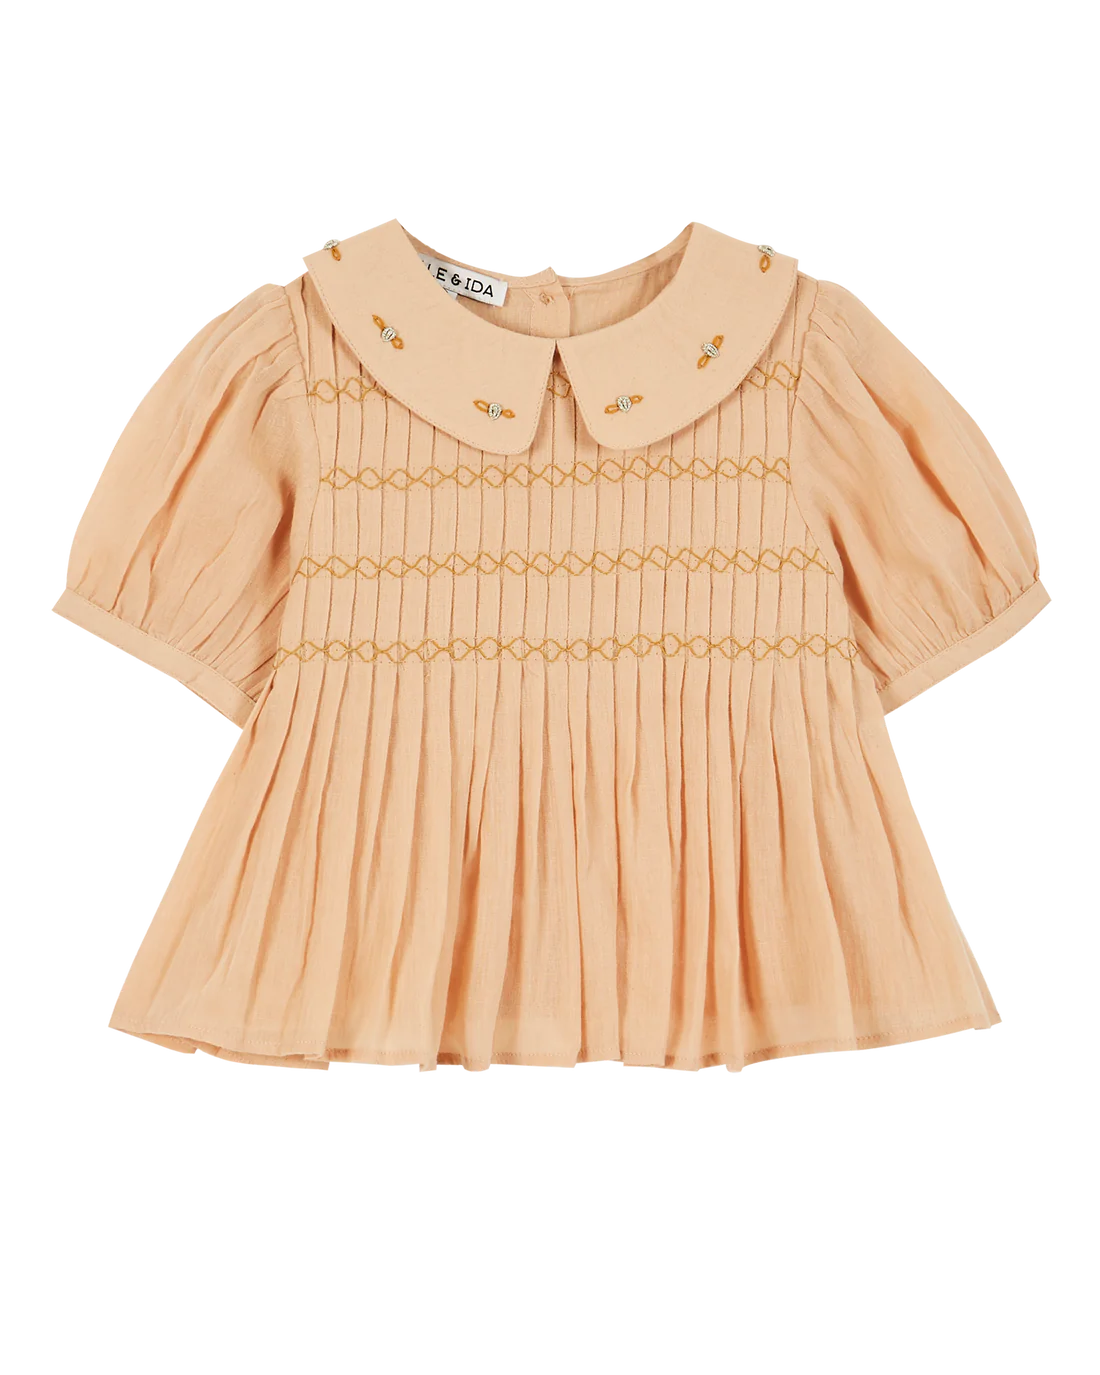 Embroidered Collar Smocked Cotton Blouse | Beige